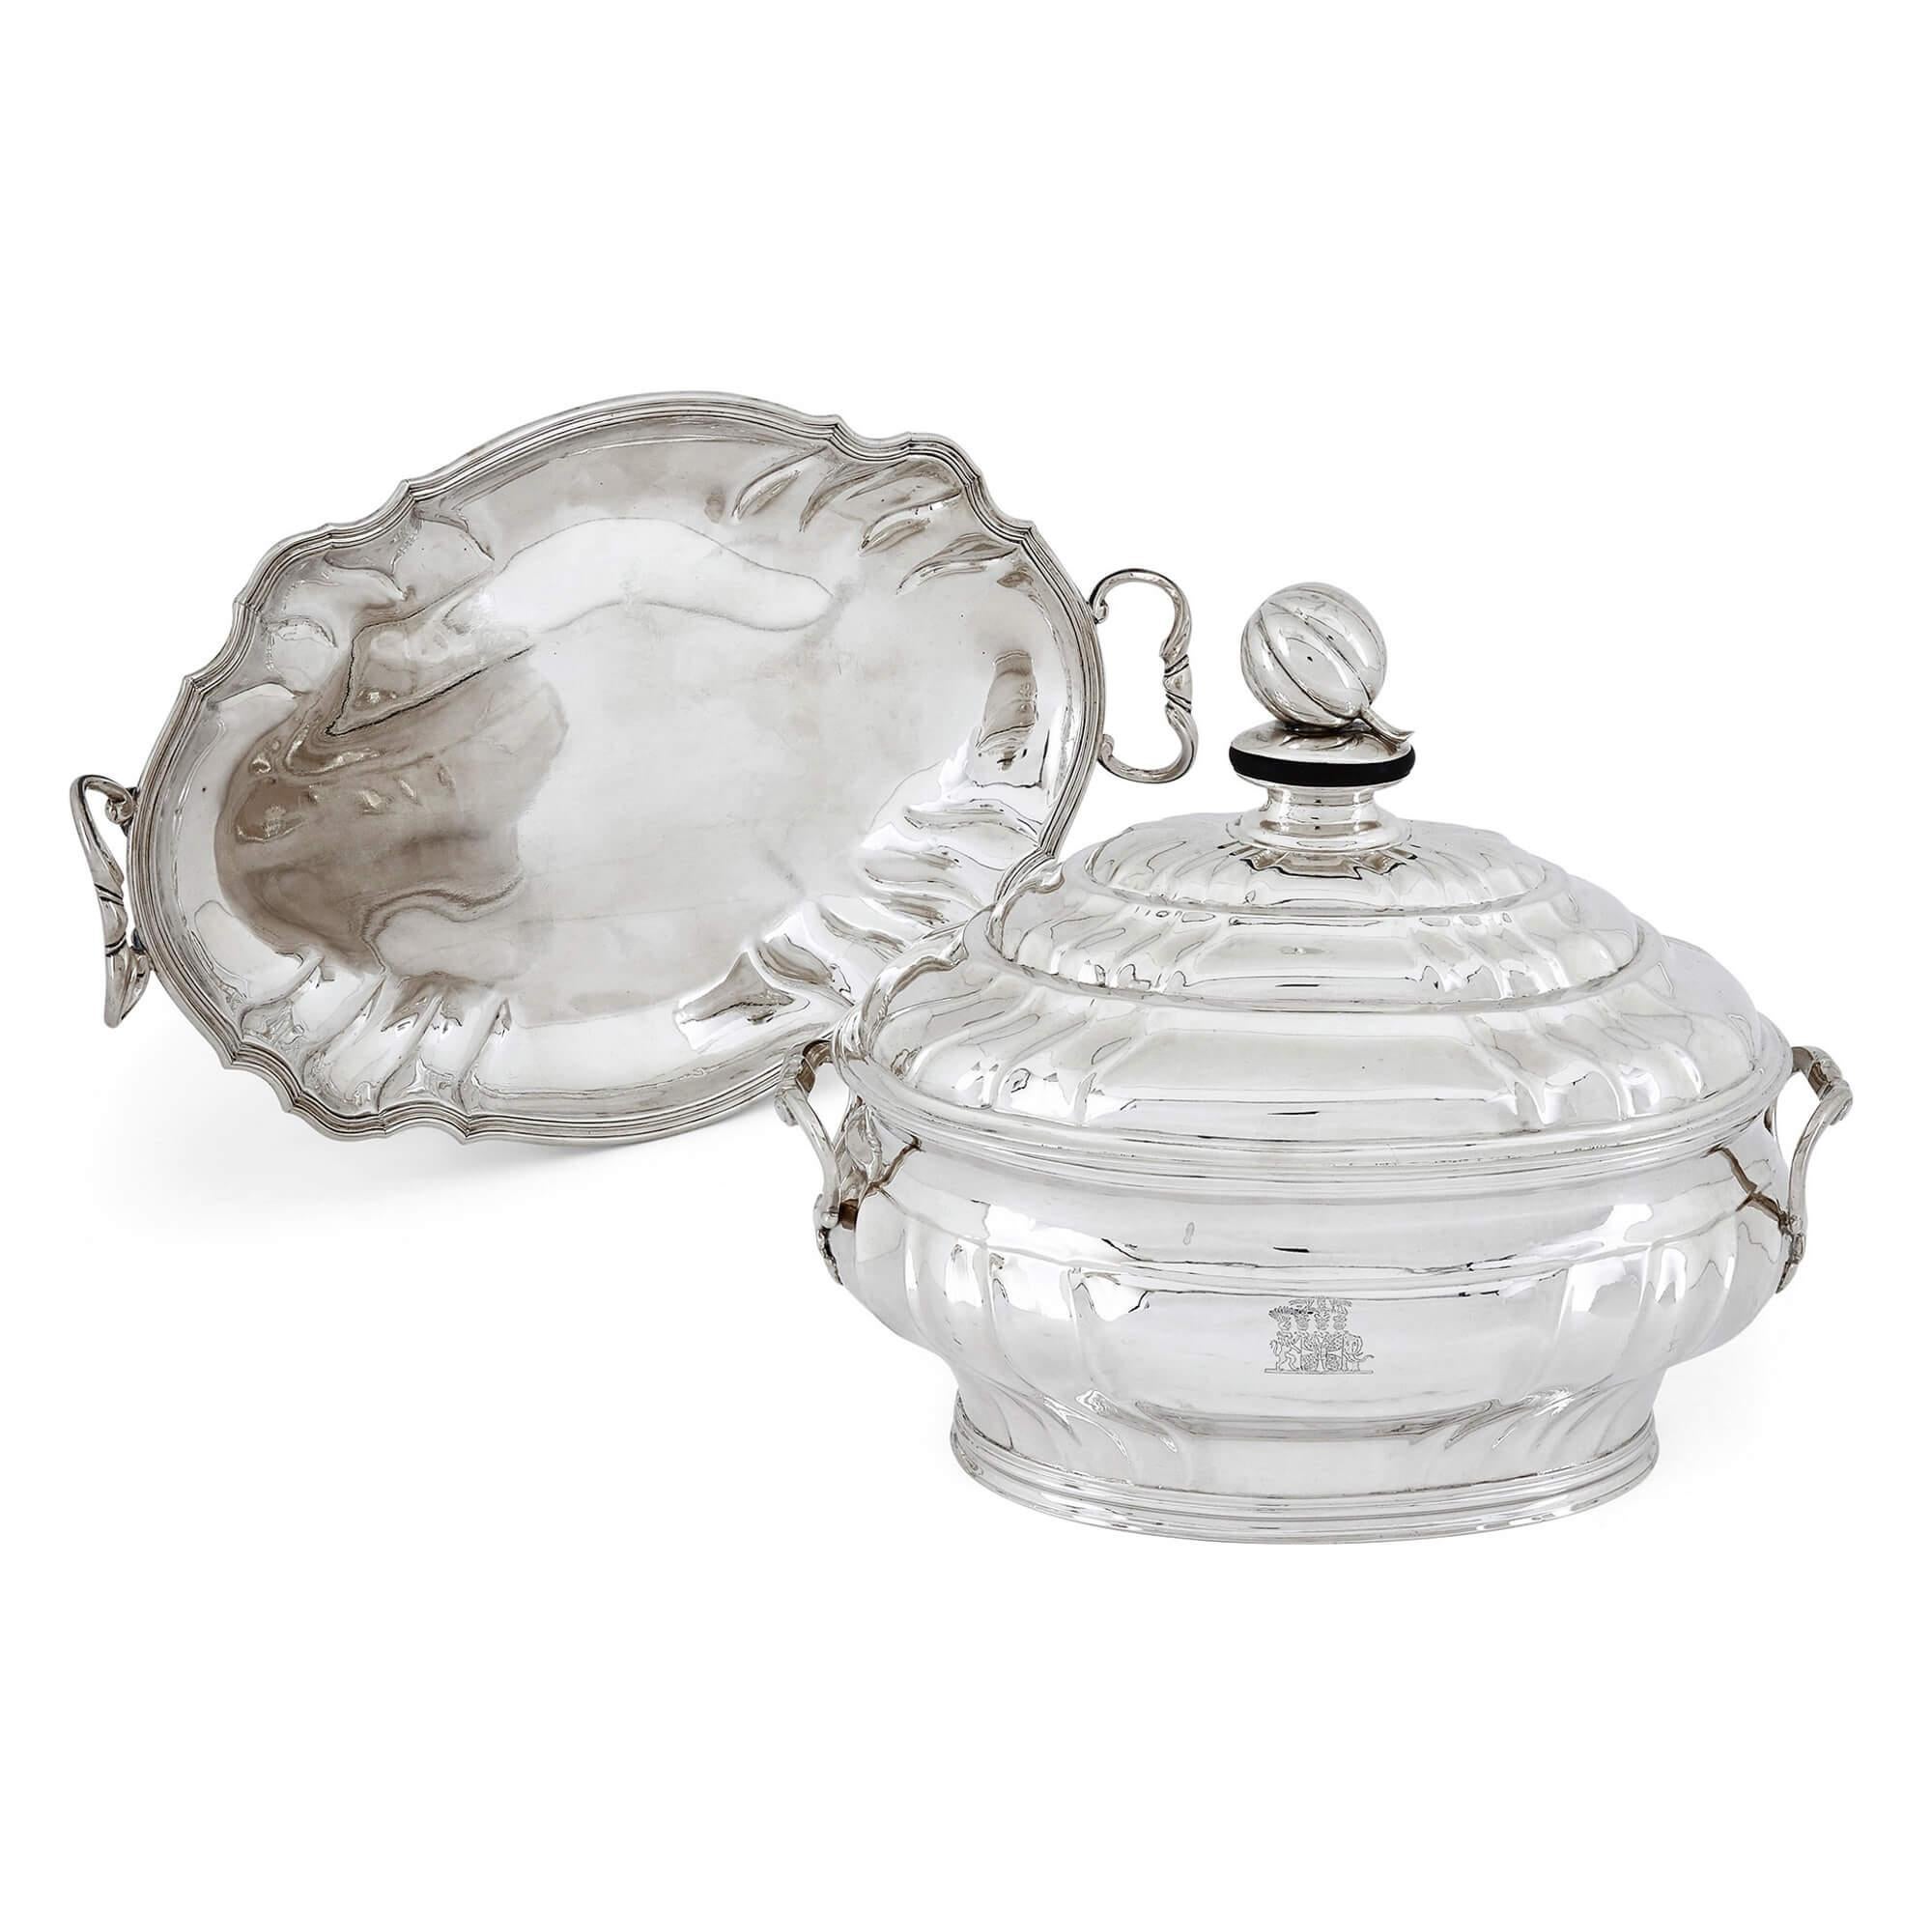 Mid-18th Century Pair of Rare Danish Eighteenth-Century Silver Soup Tureens with Trays For Sale